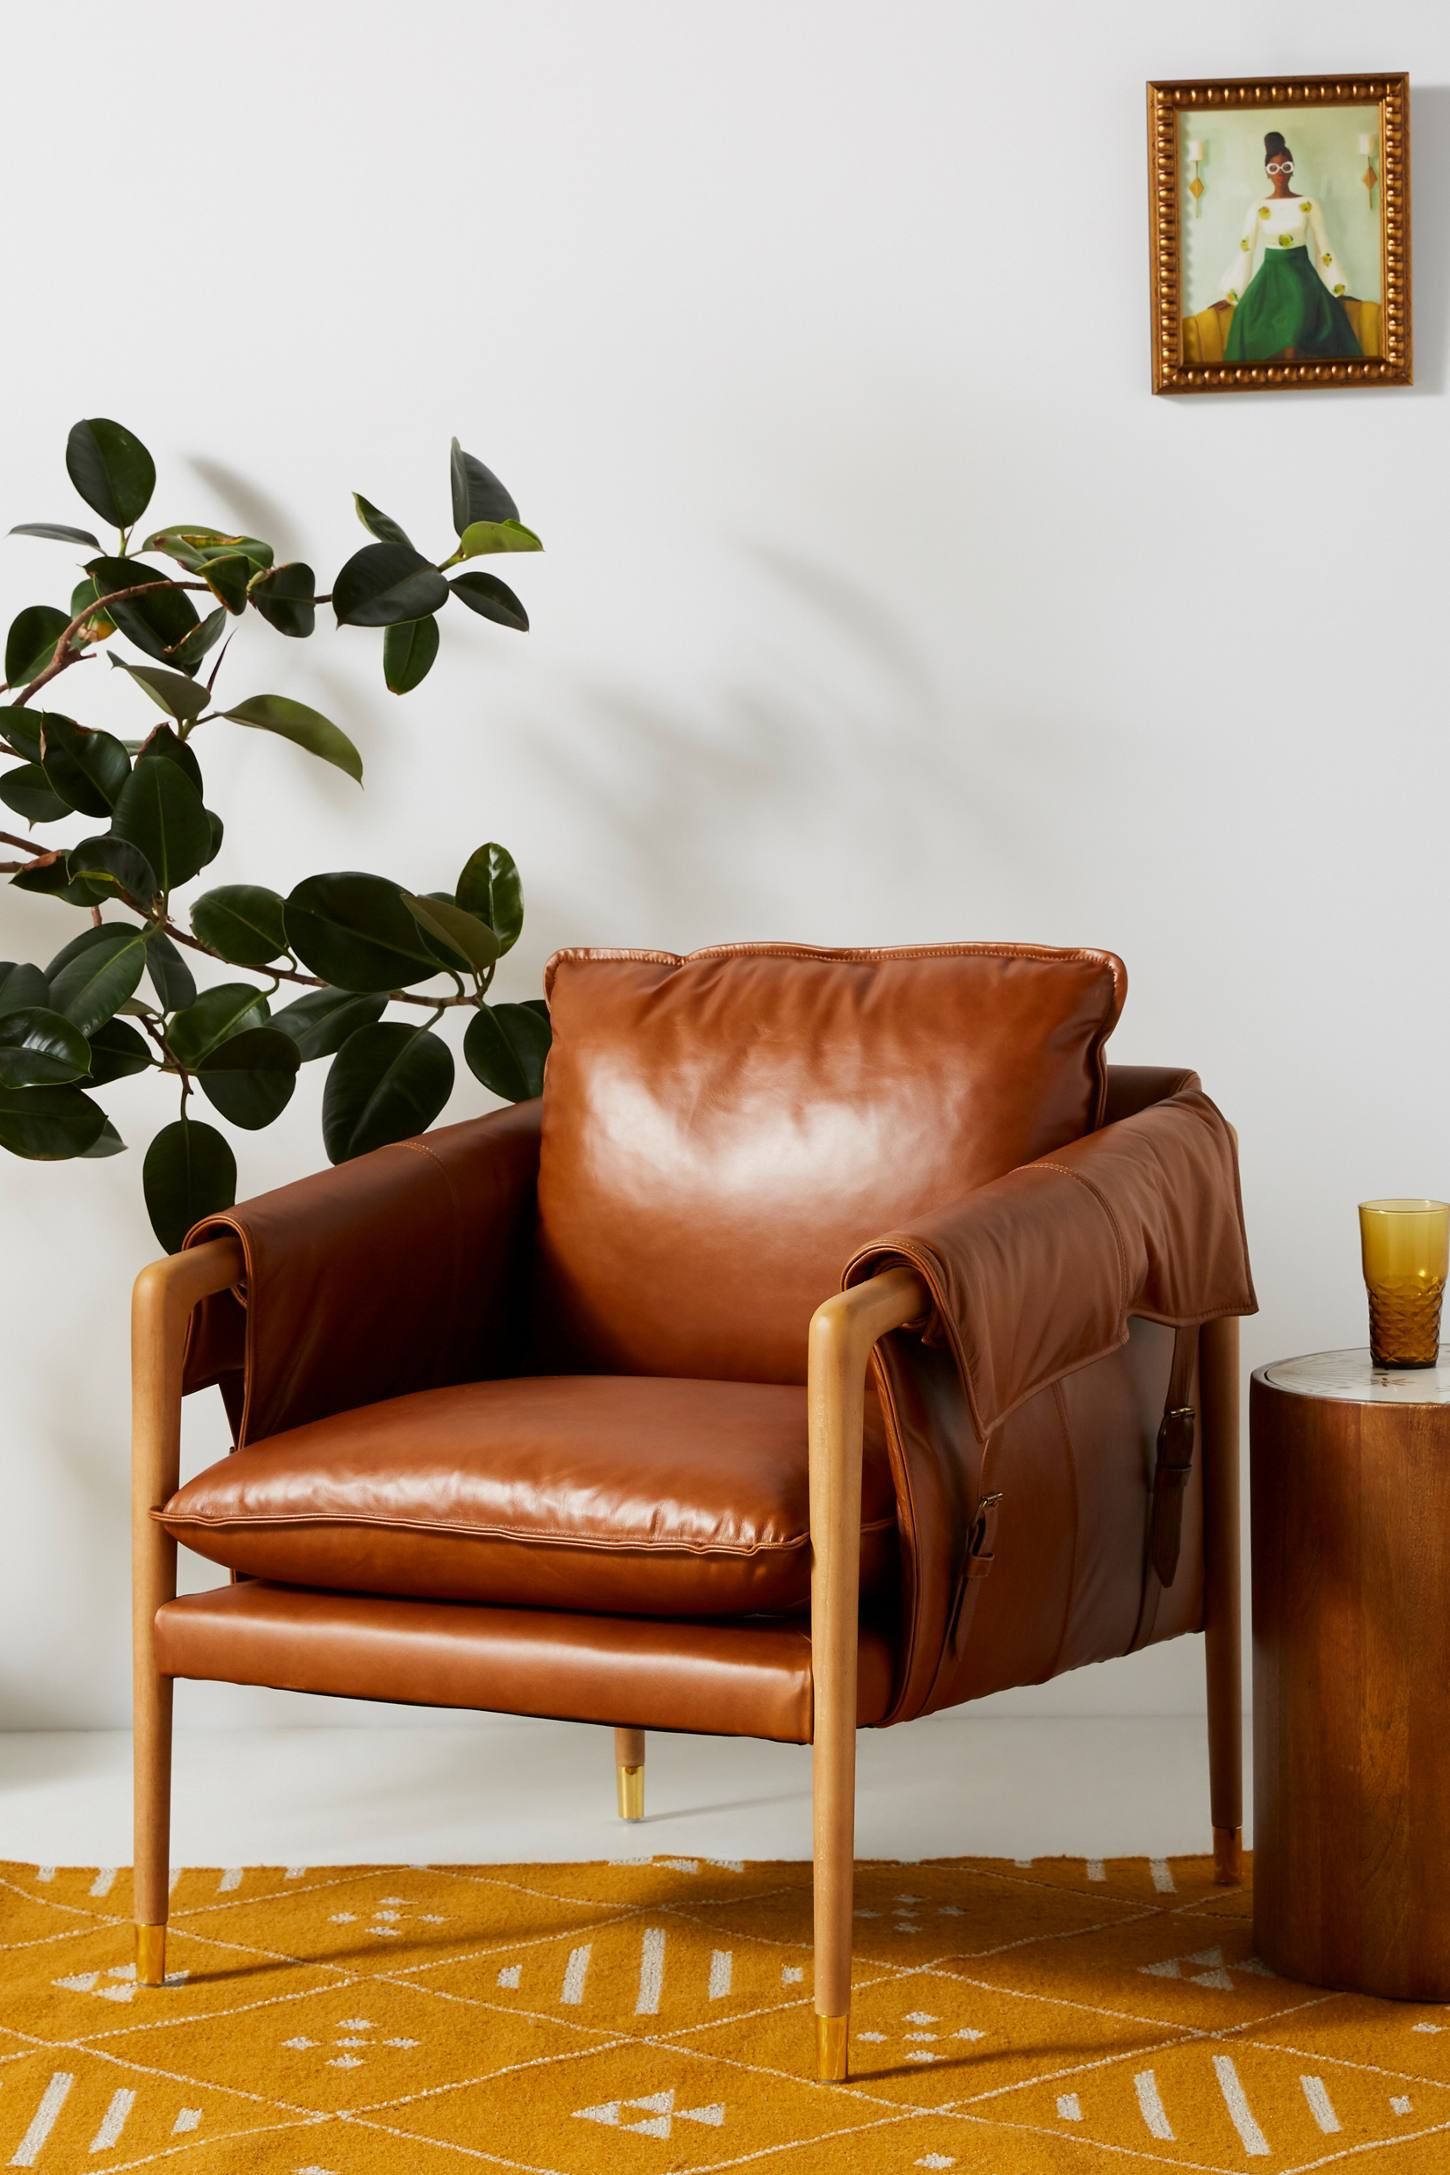 The Best Armchairs of 2020 and Where to Shop for Them Online